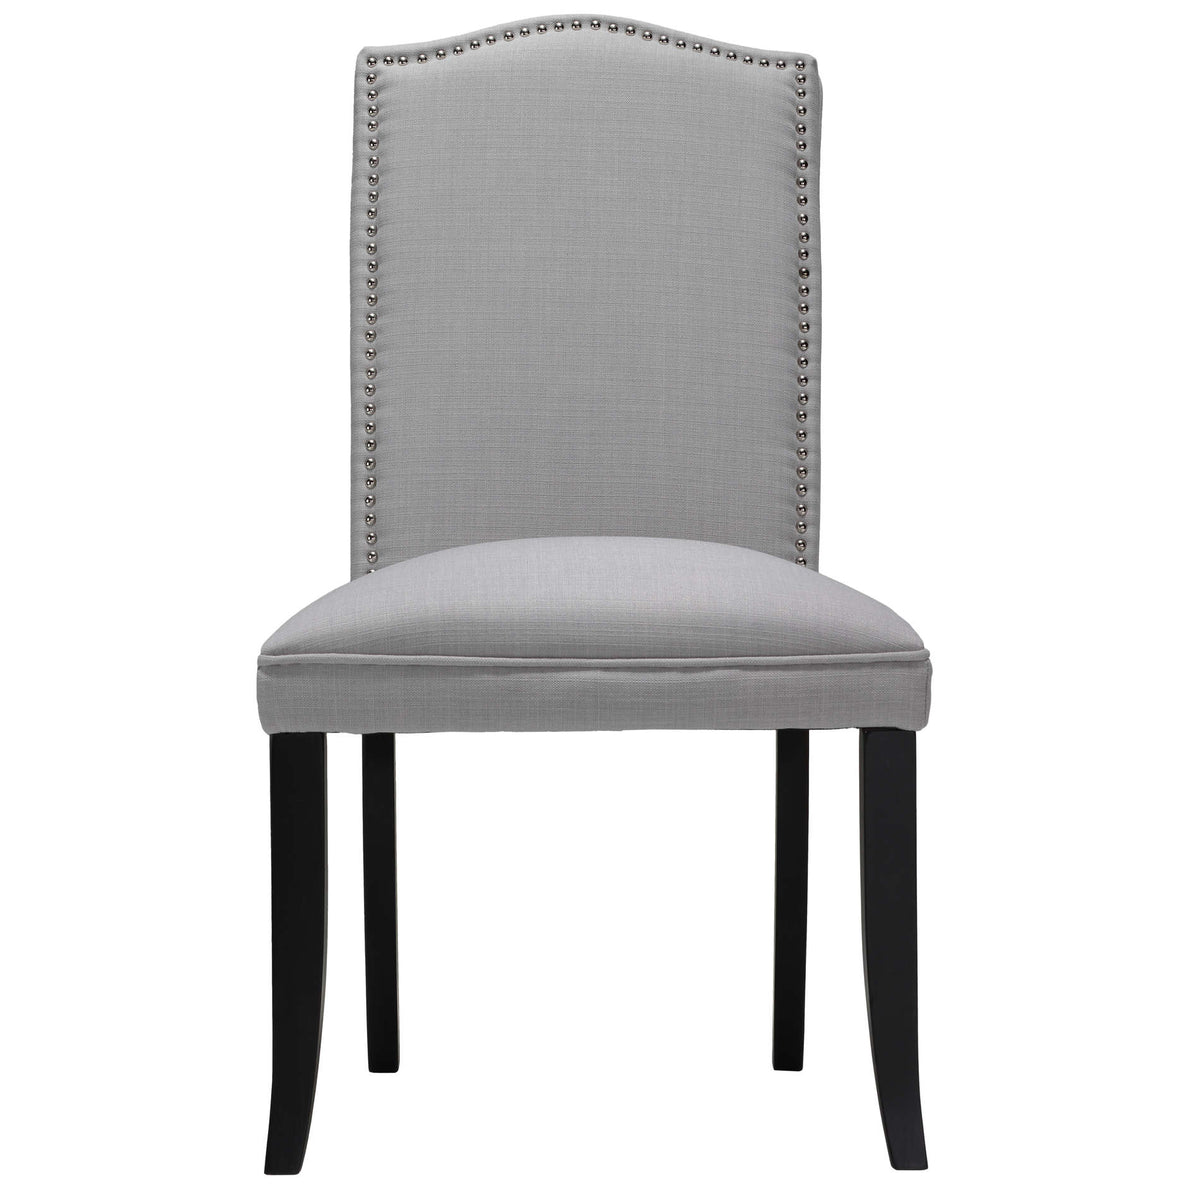 Cortesi Home Duomo Stone Grey Linen Crown Back Dining Chair (Set of 2)